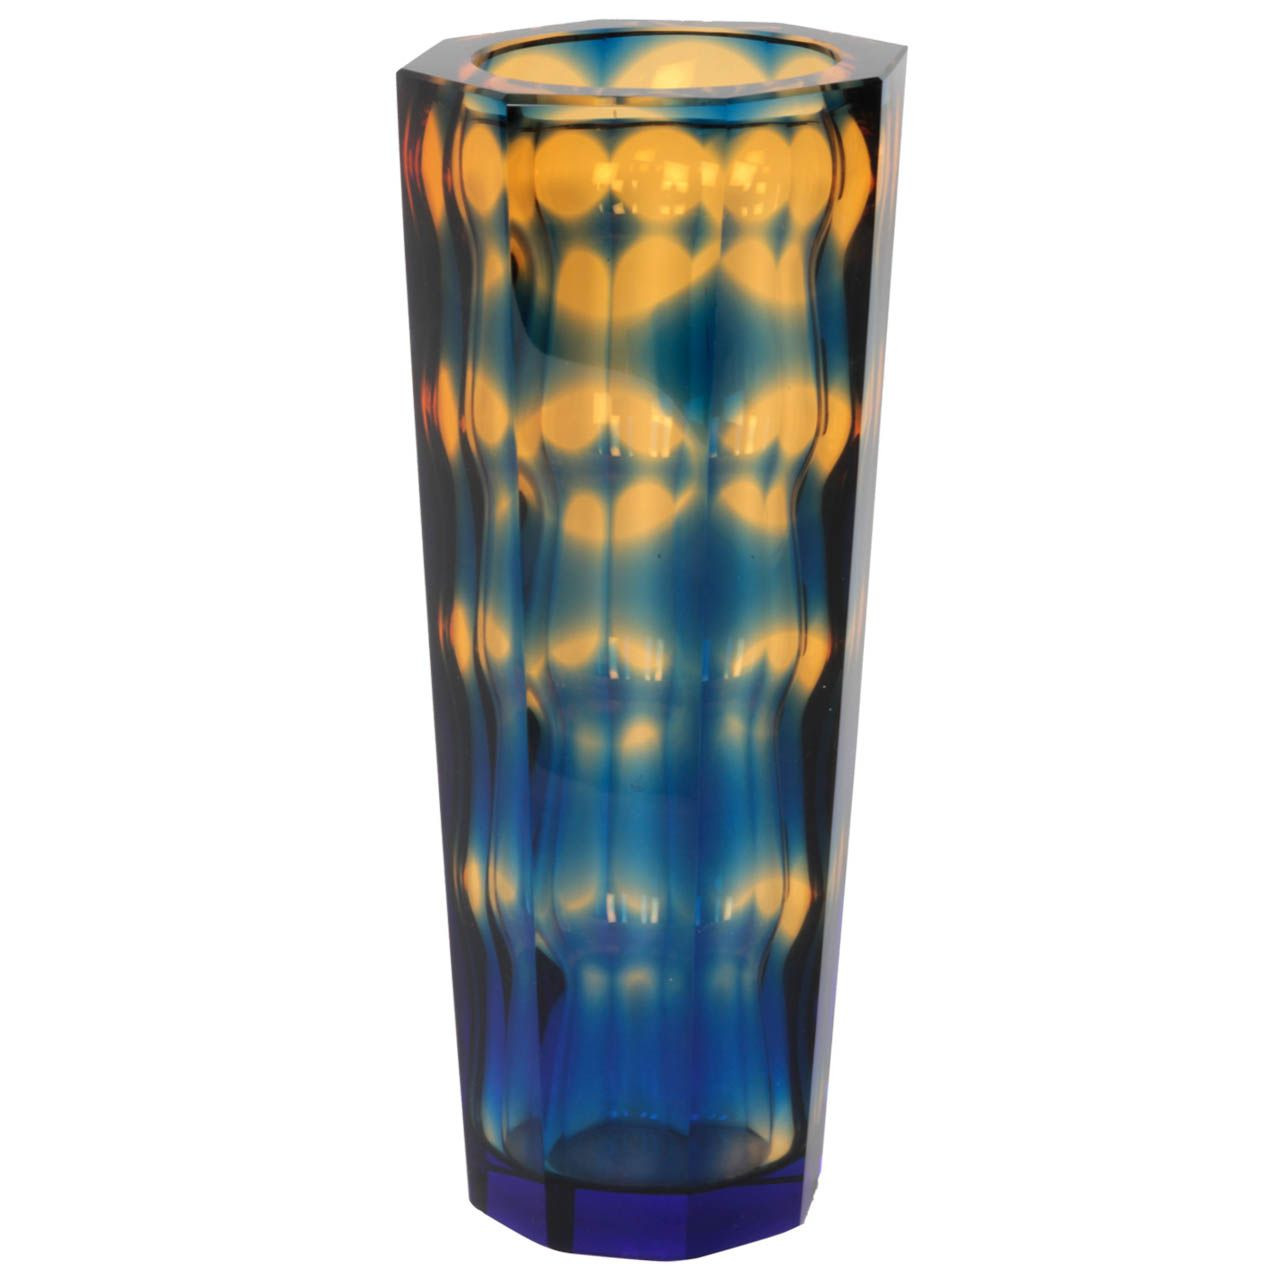 12 Wonderful 20 Glass Vase 2024 free download 20 glass vase of an amazing sommerso glass vase in amber blue tones attributed to with an amazing sommerso glass vase in amber blue tones attributed to oldrich lipsky